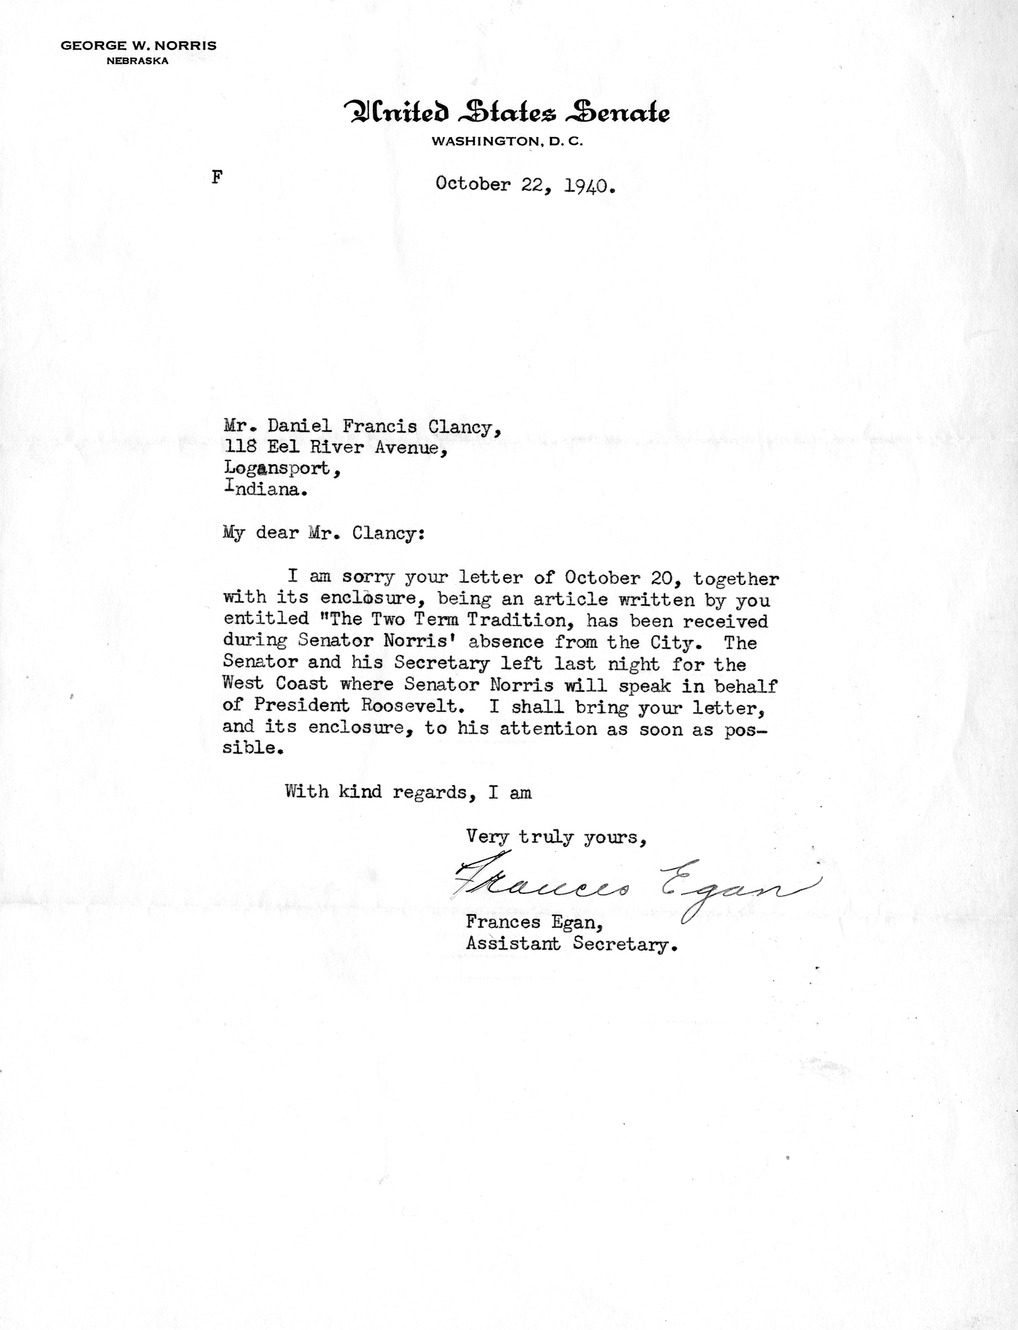 Letter from Frances Egan to Daniel F. Clancy